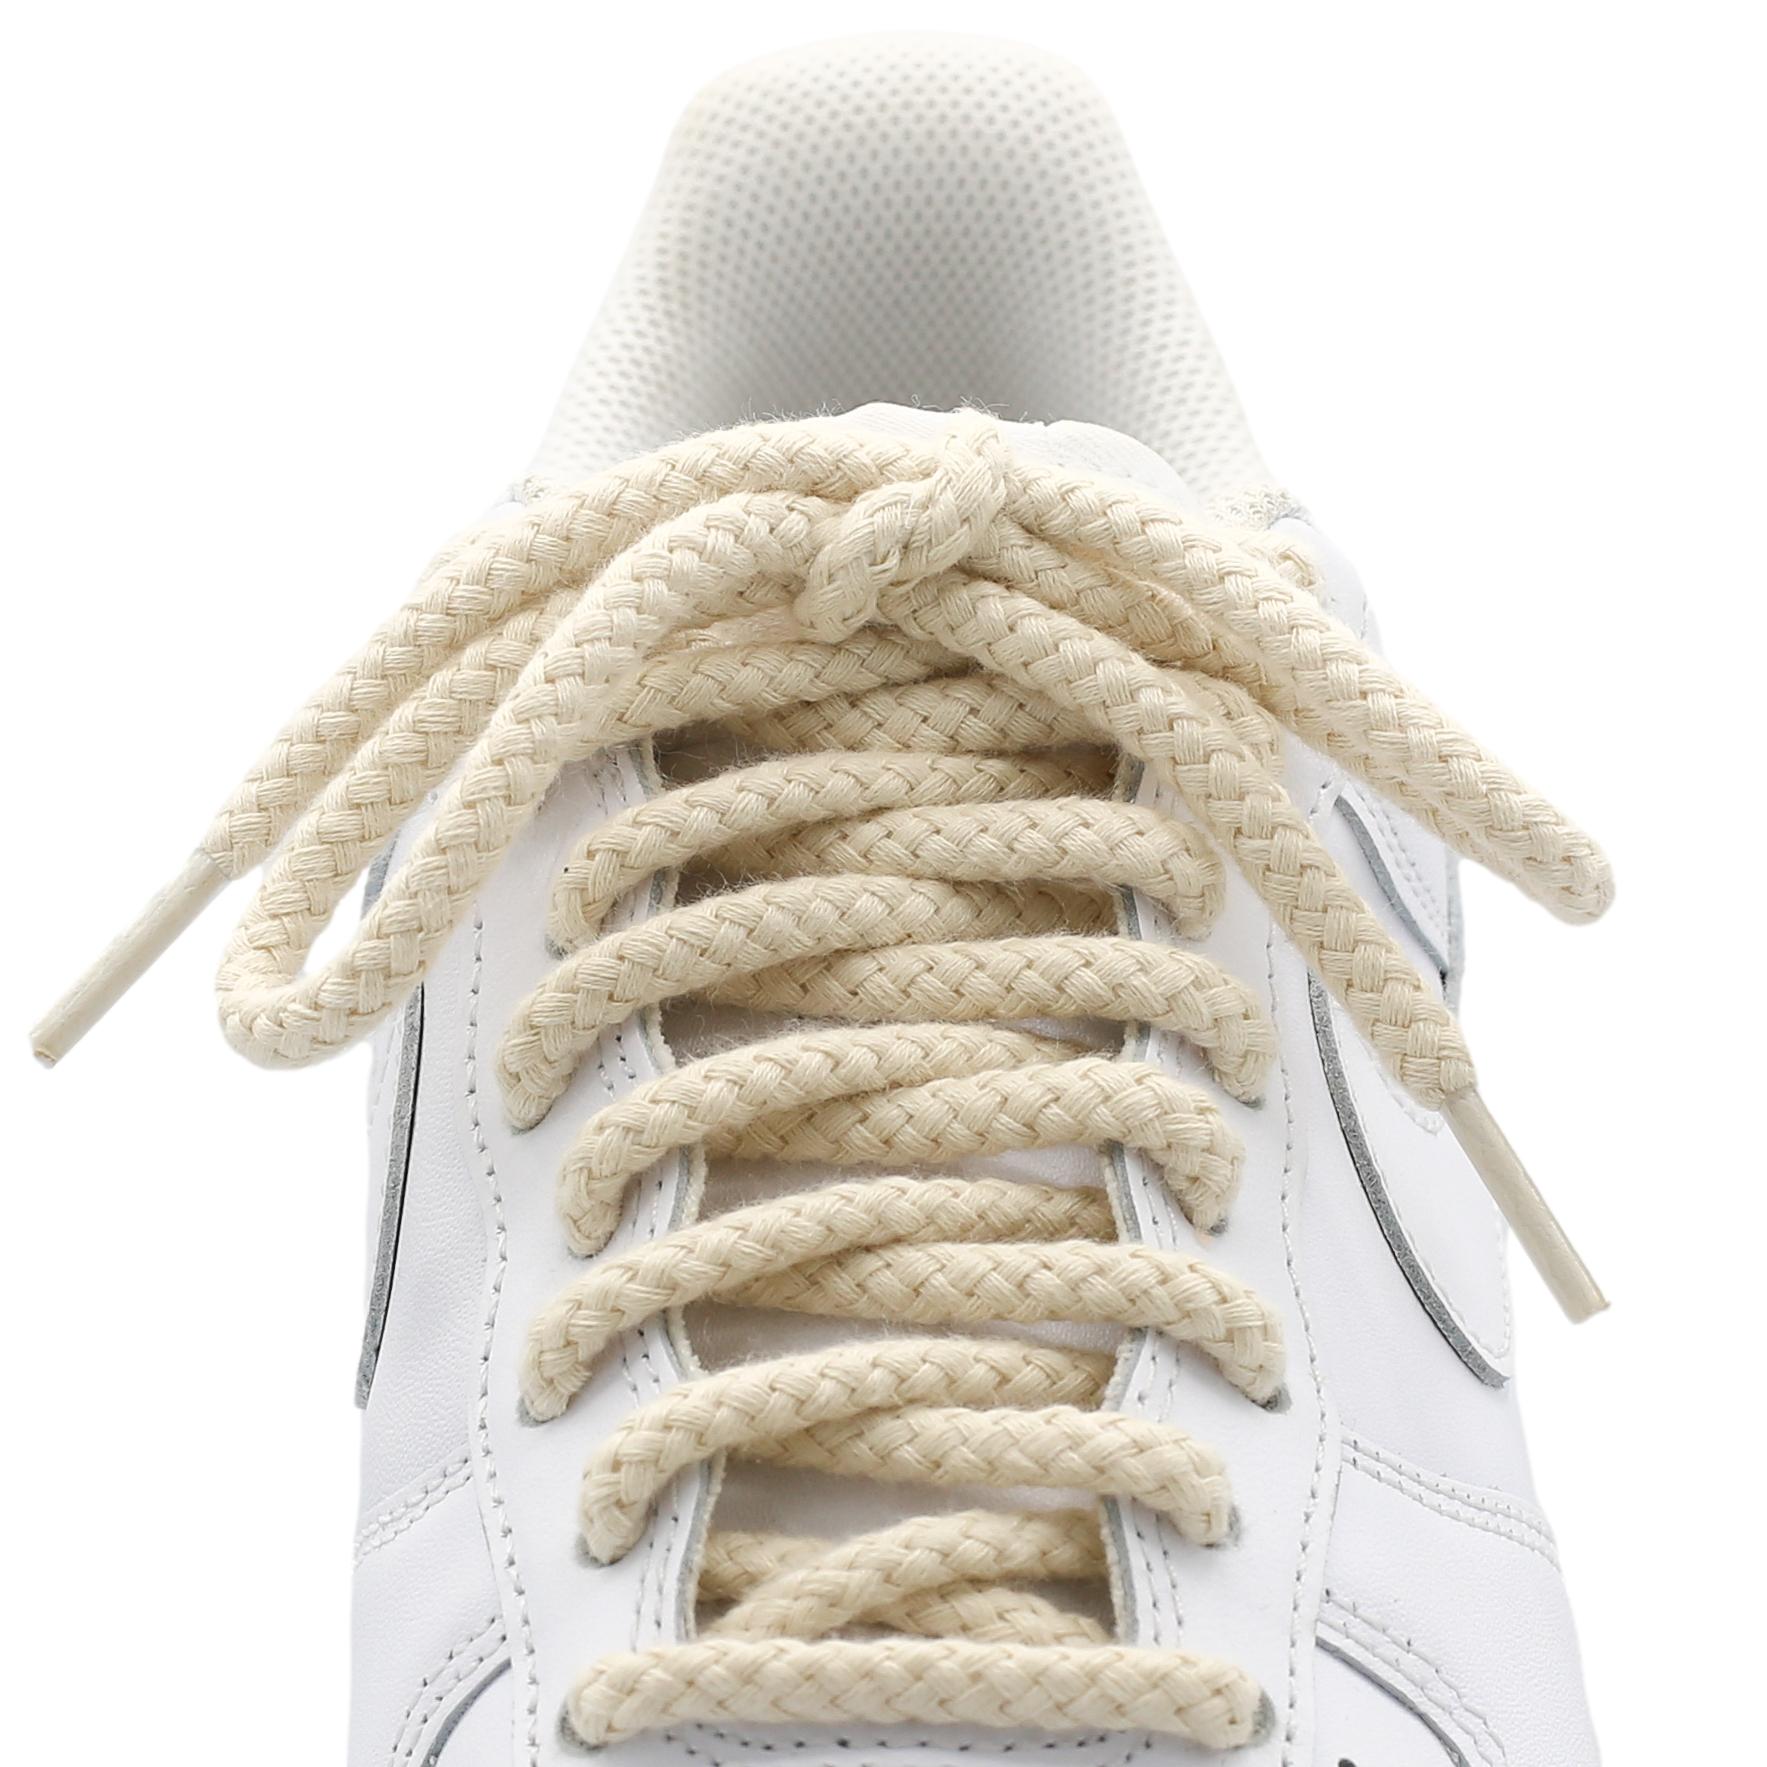 Thick Rope Shoe Laces Cream Sail off White Braided Shoelaces Travis SB Dunk  